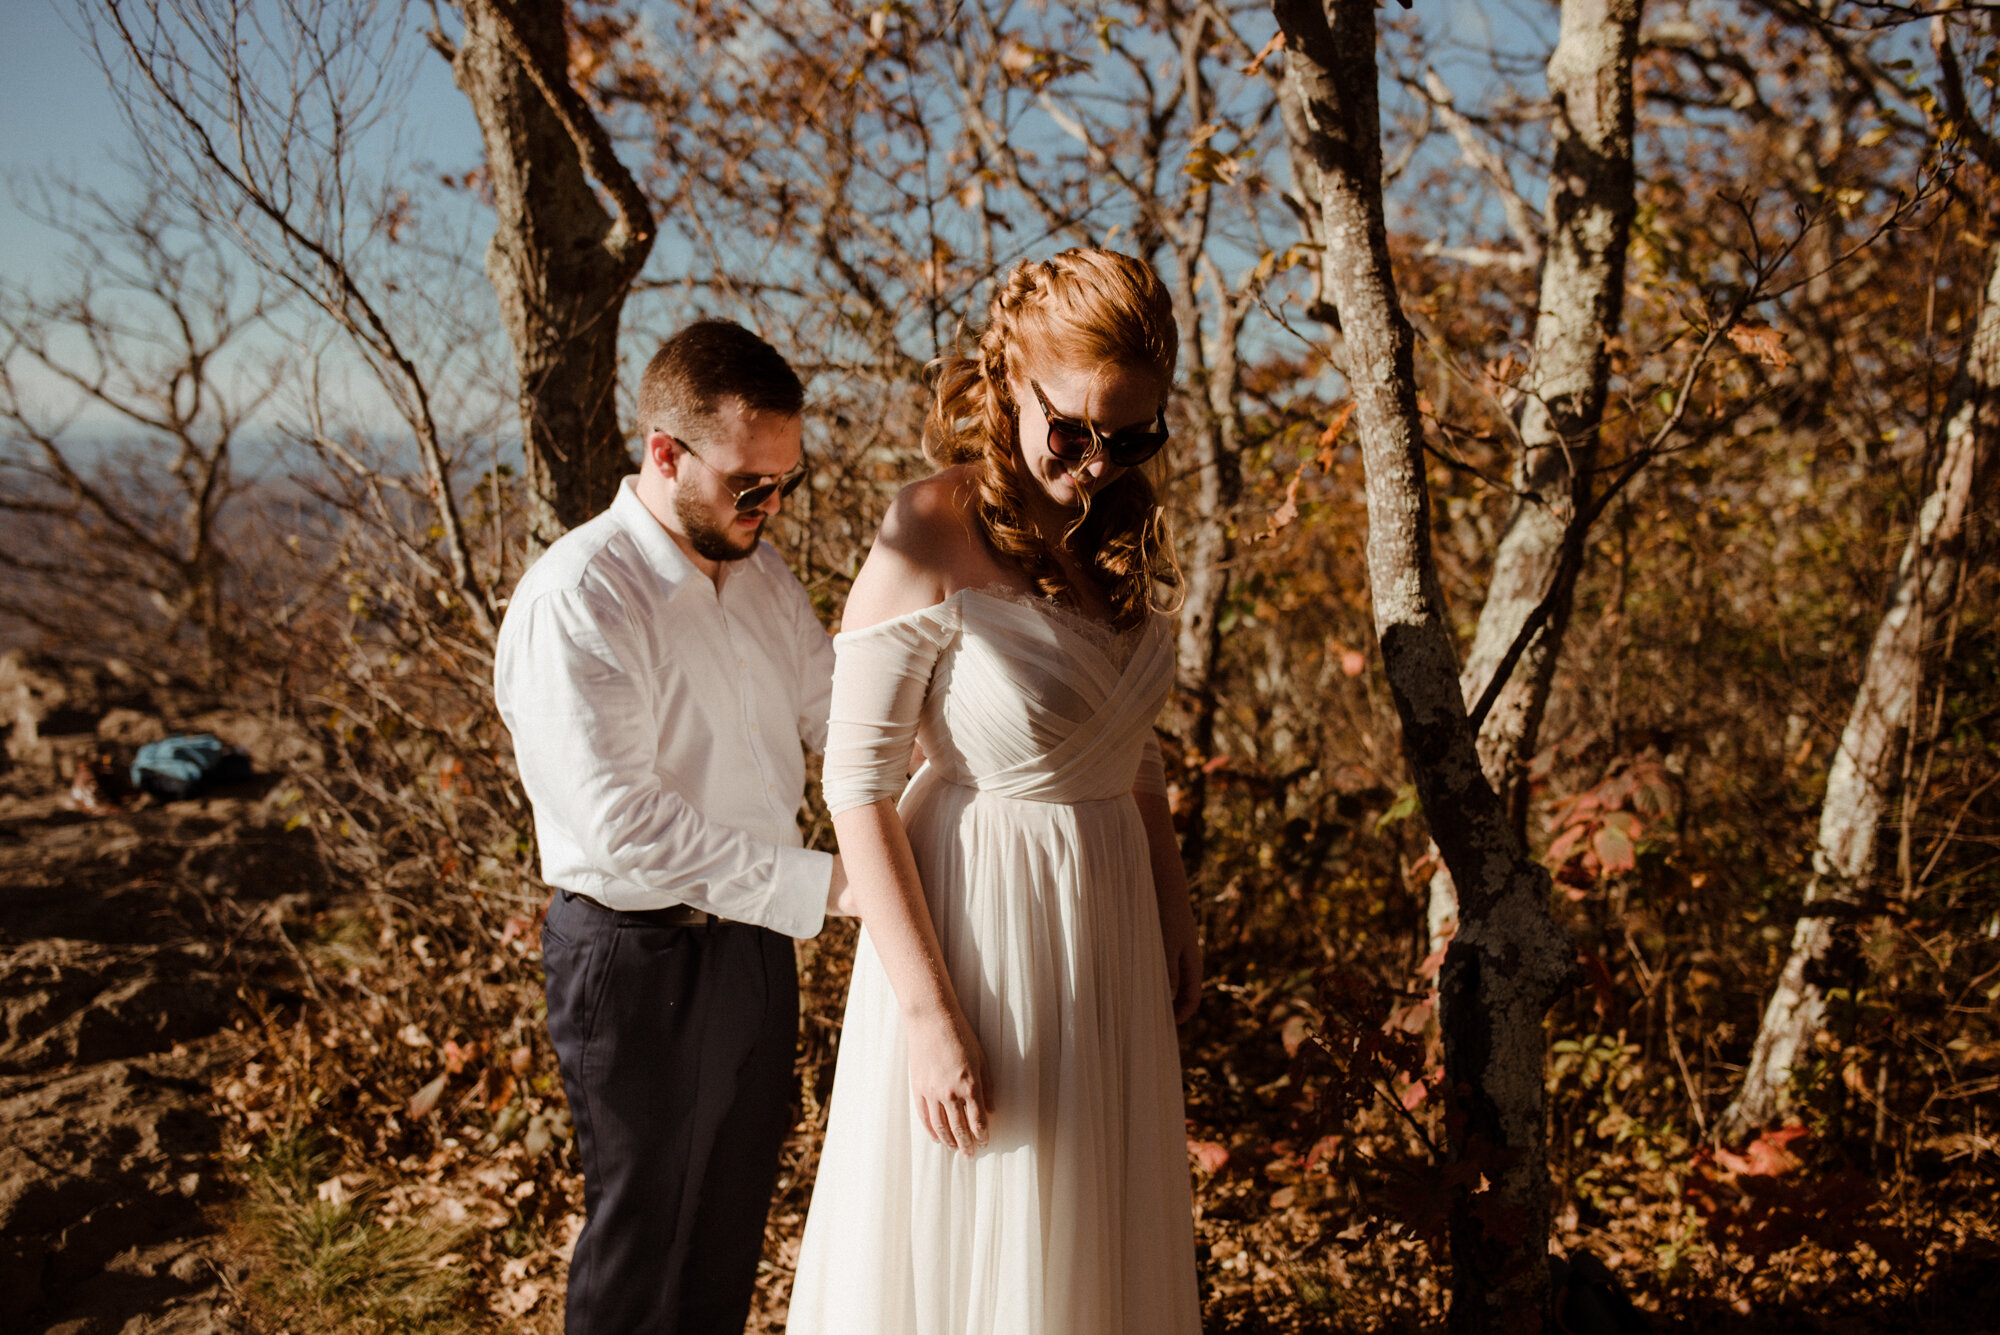 Emily and Ryan - Mountain Top Elopement - Shenandoah National Park - Blue Ridge Mountains Couple Photo Shoot in the Fall - White Sails Creative_11.jpg